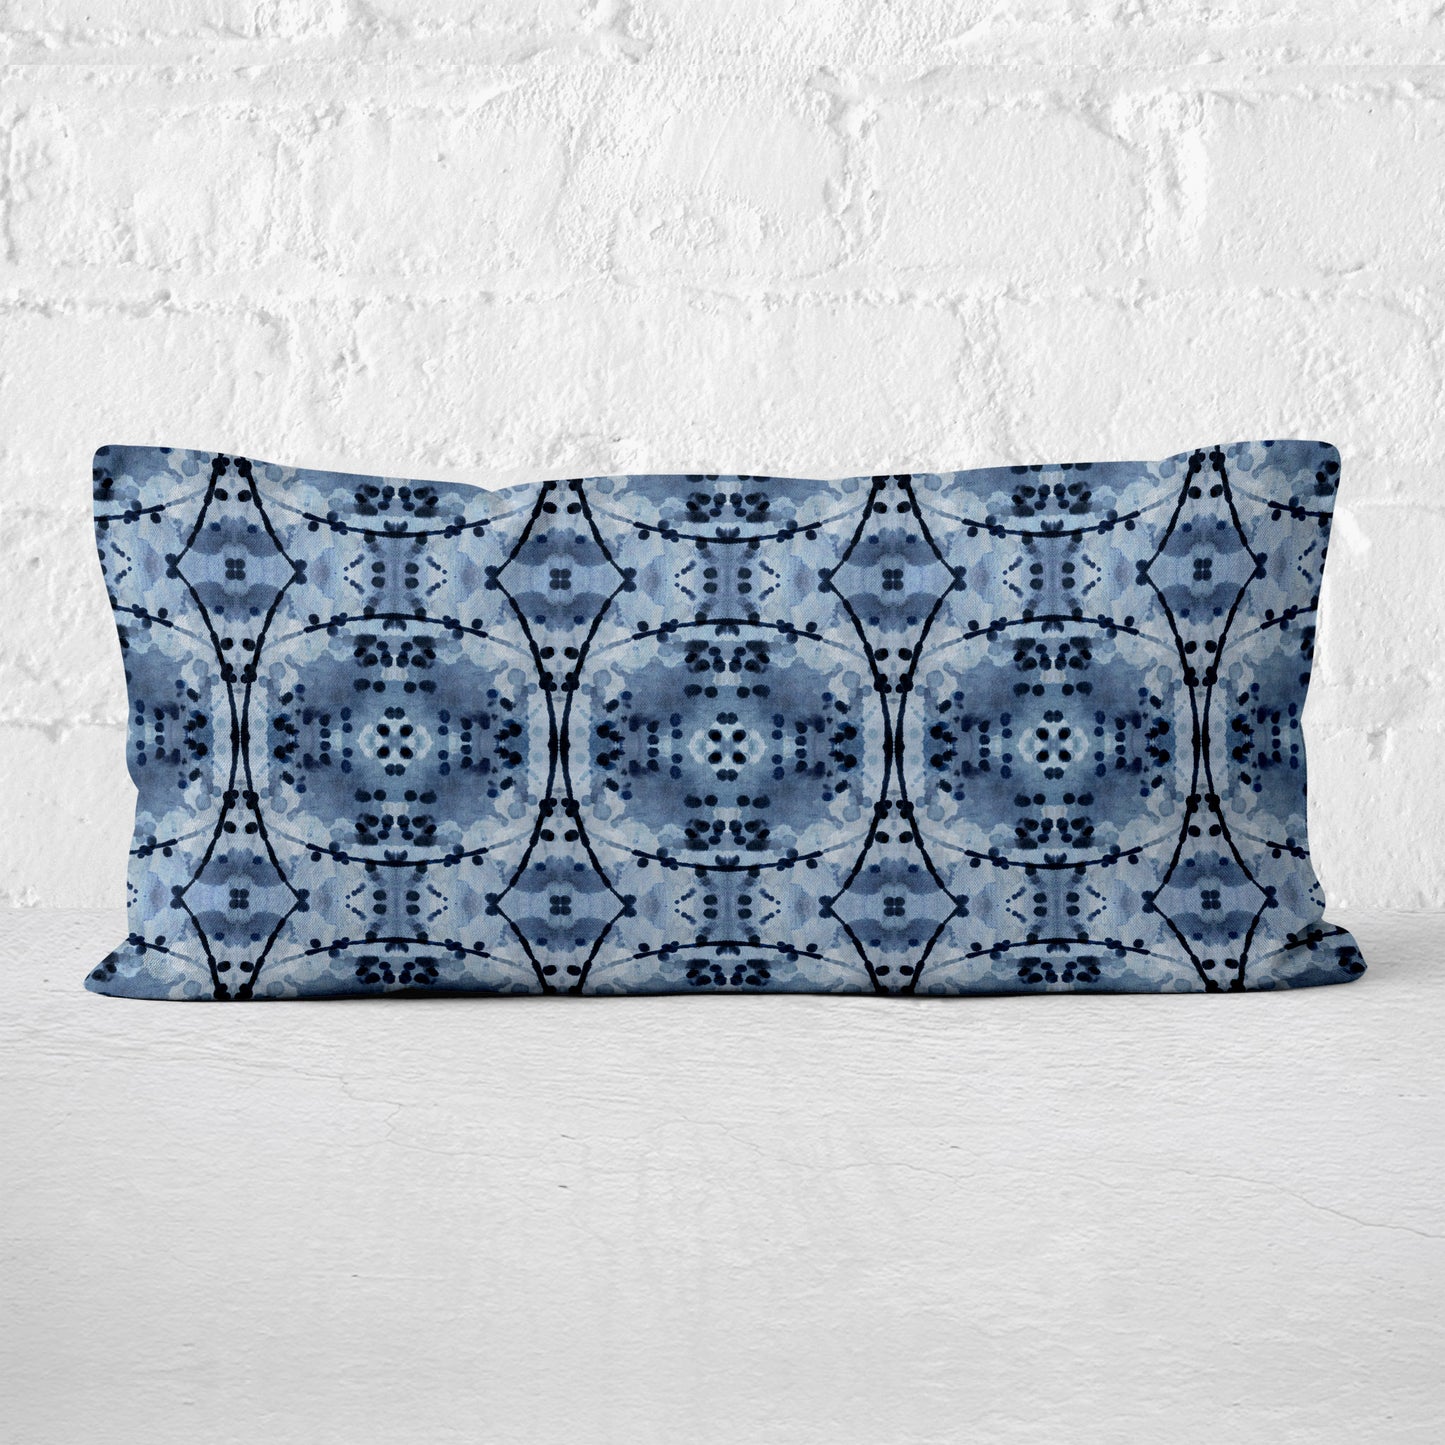 Rectangular lumbar pillow featuring an abstract hand-painted pattern in blue and black India Ink leaning against white brick wall